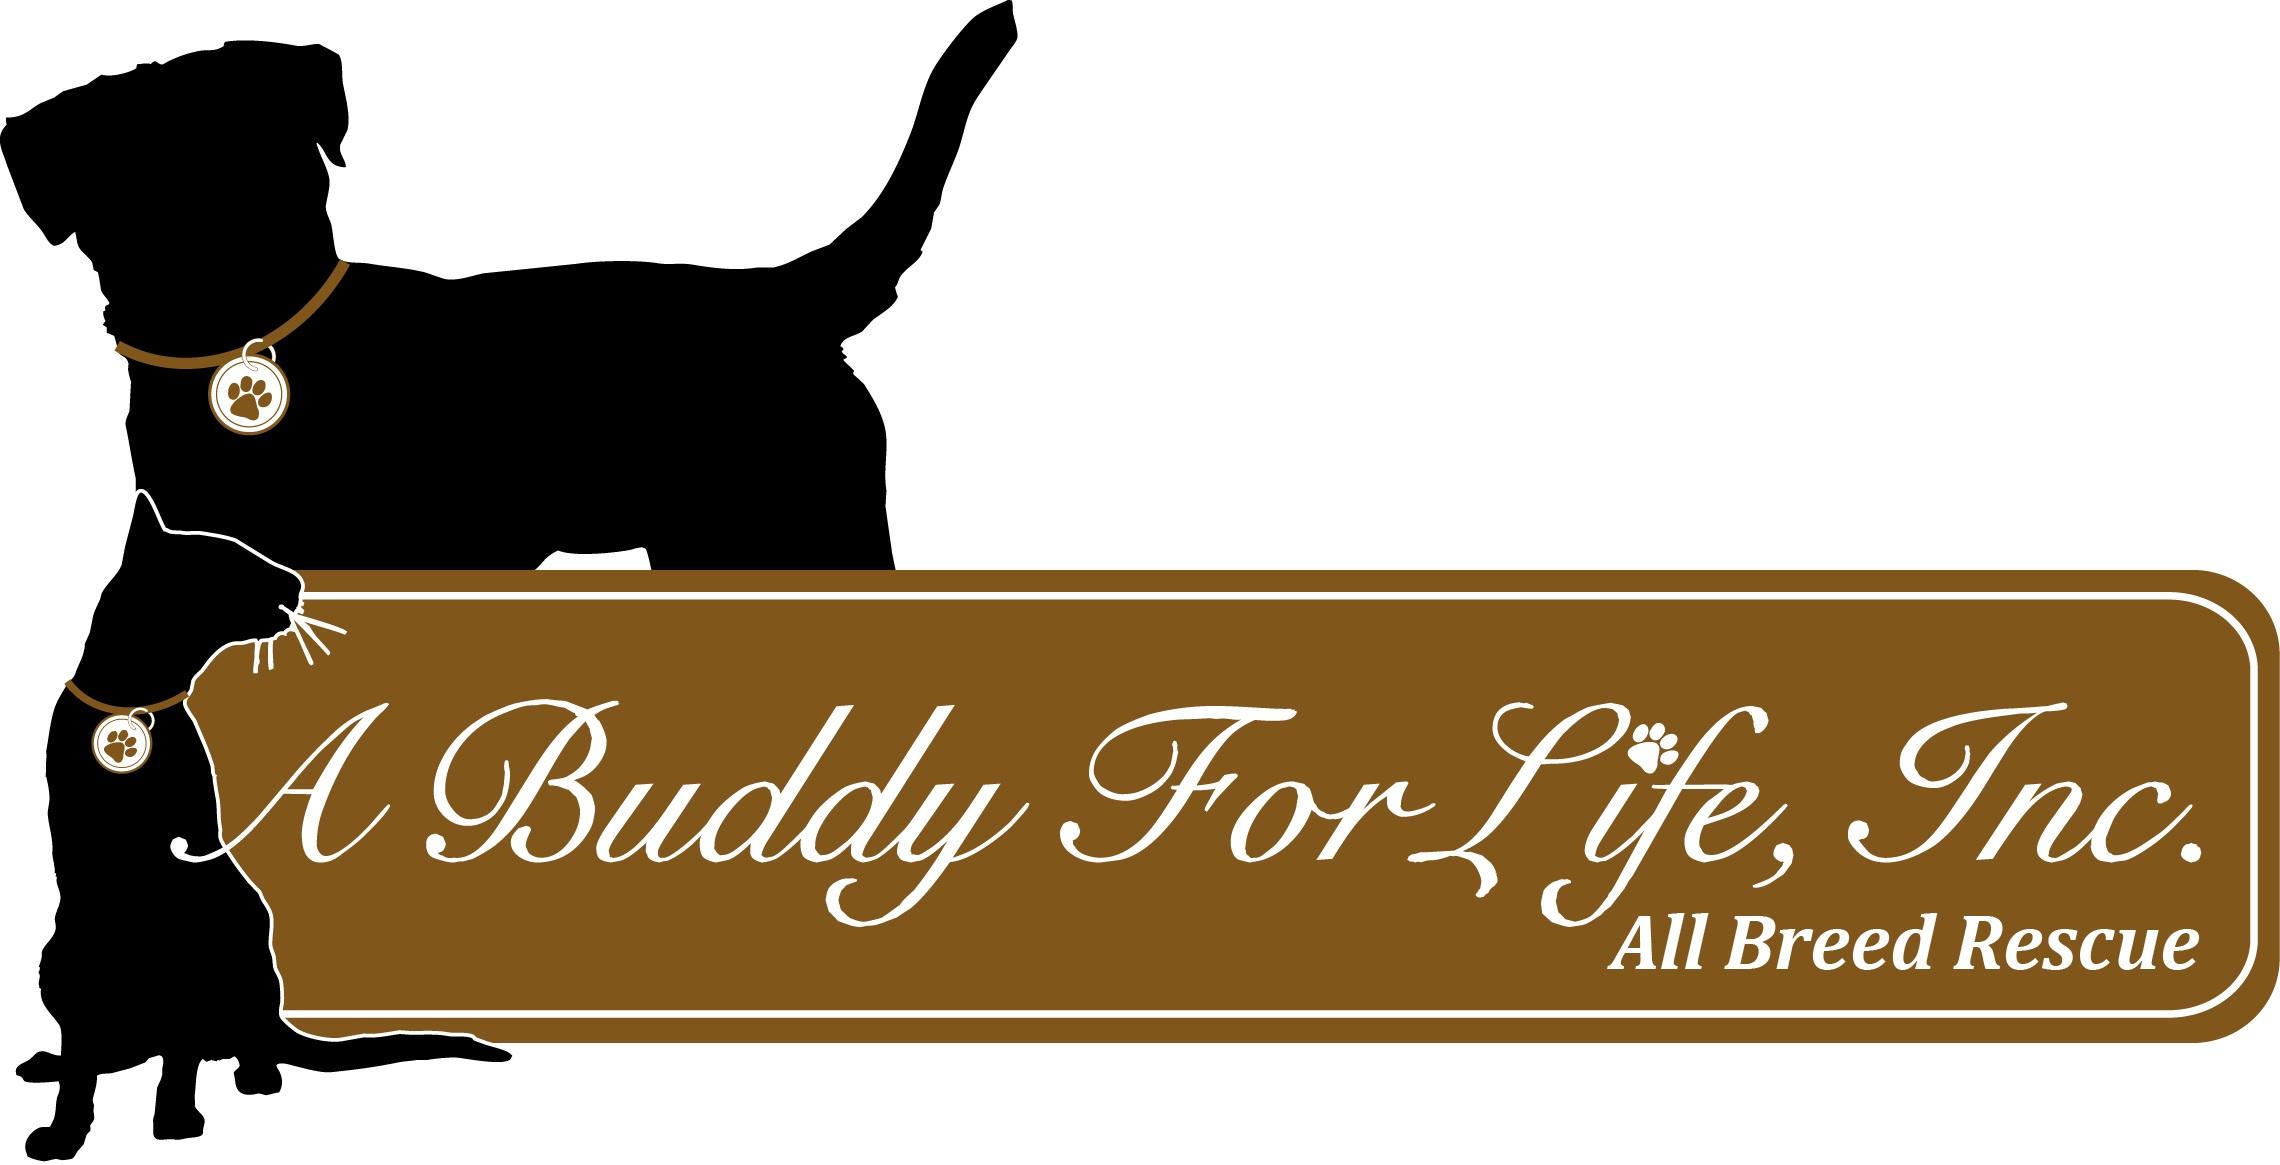 A Buddy For Life Inc.